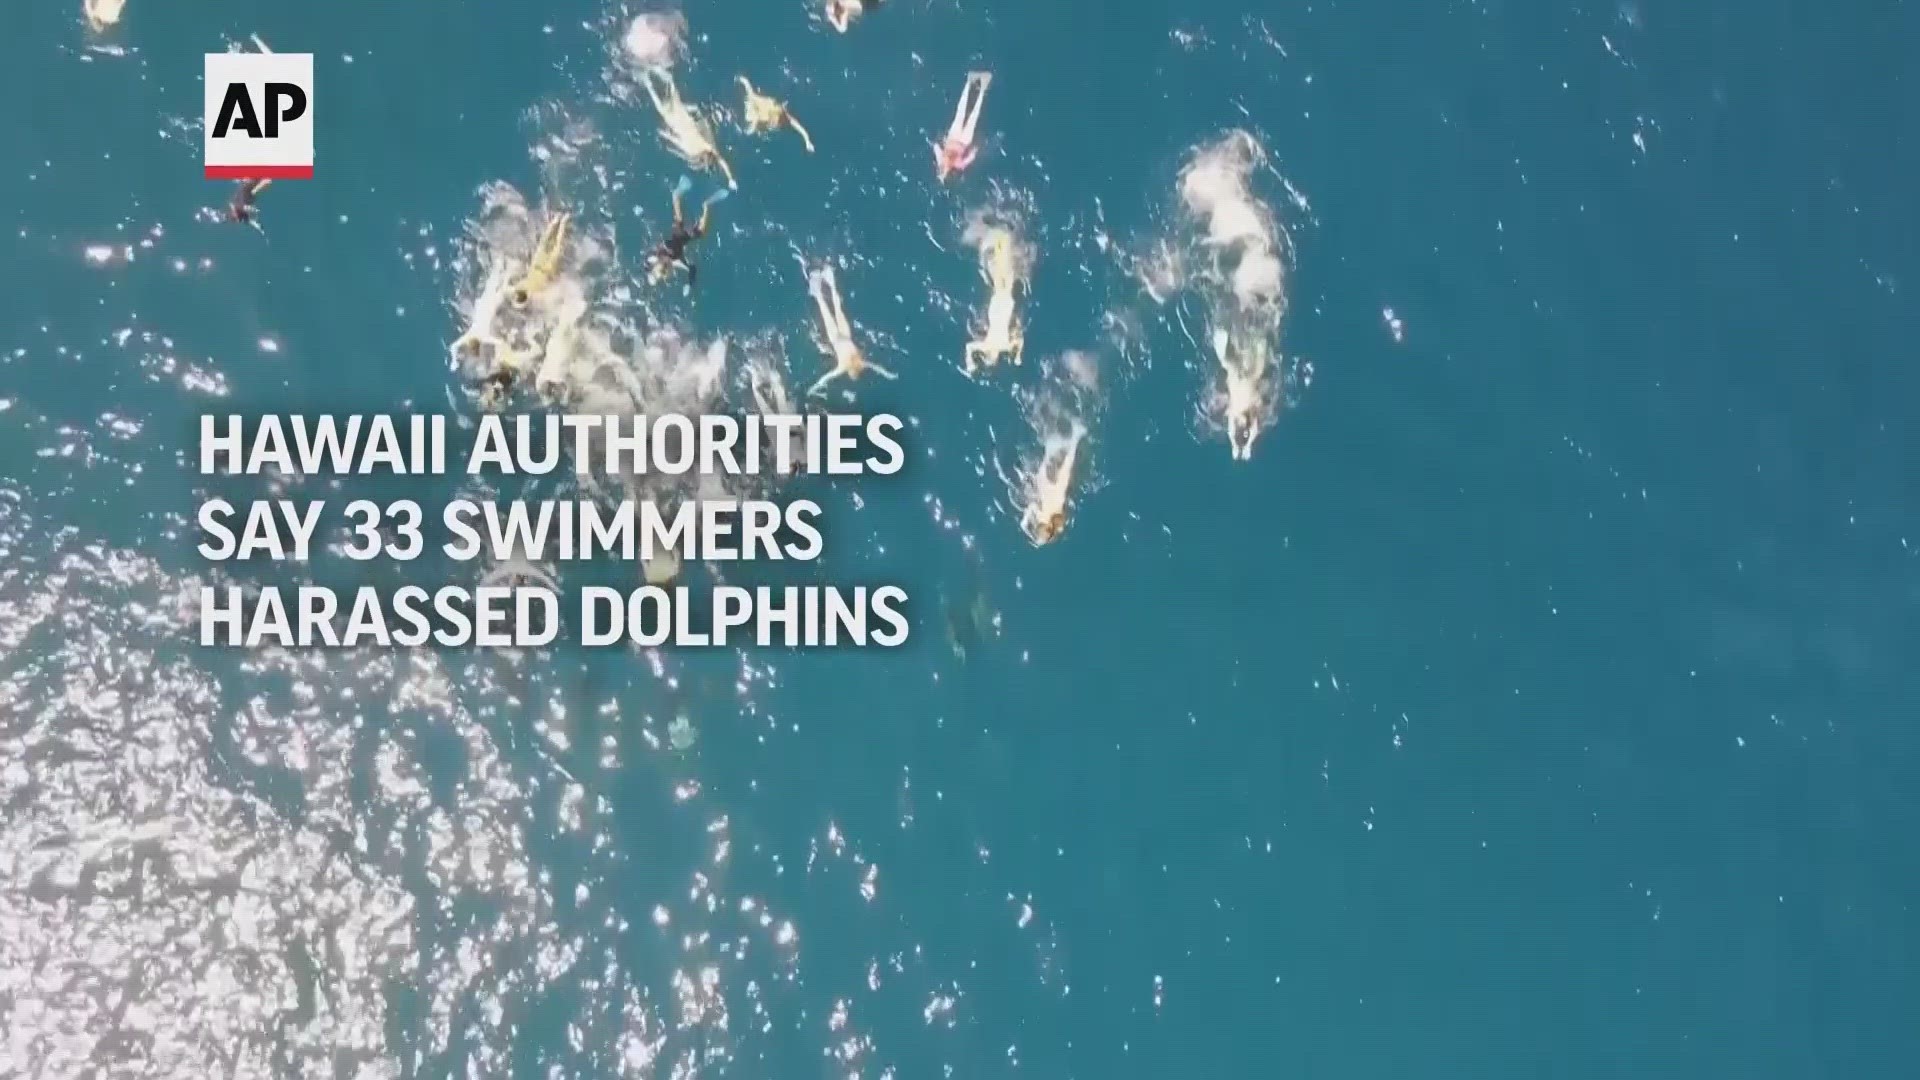 Officials said drone video showed swimmers "who appear to be aggressively pursuing, corralling and harassing the pod."